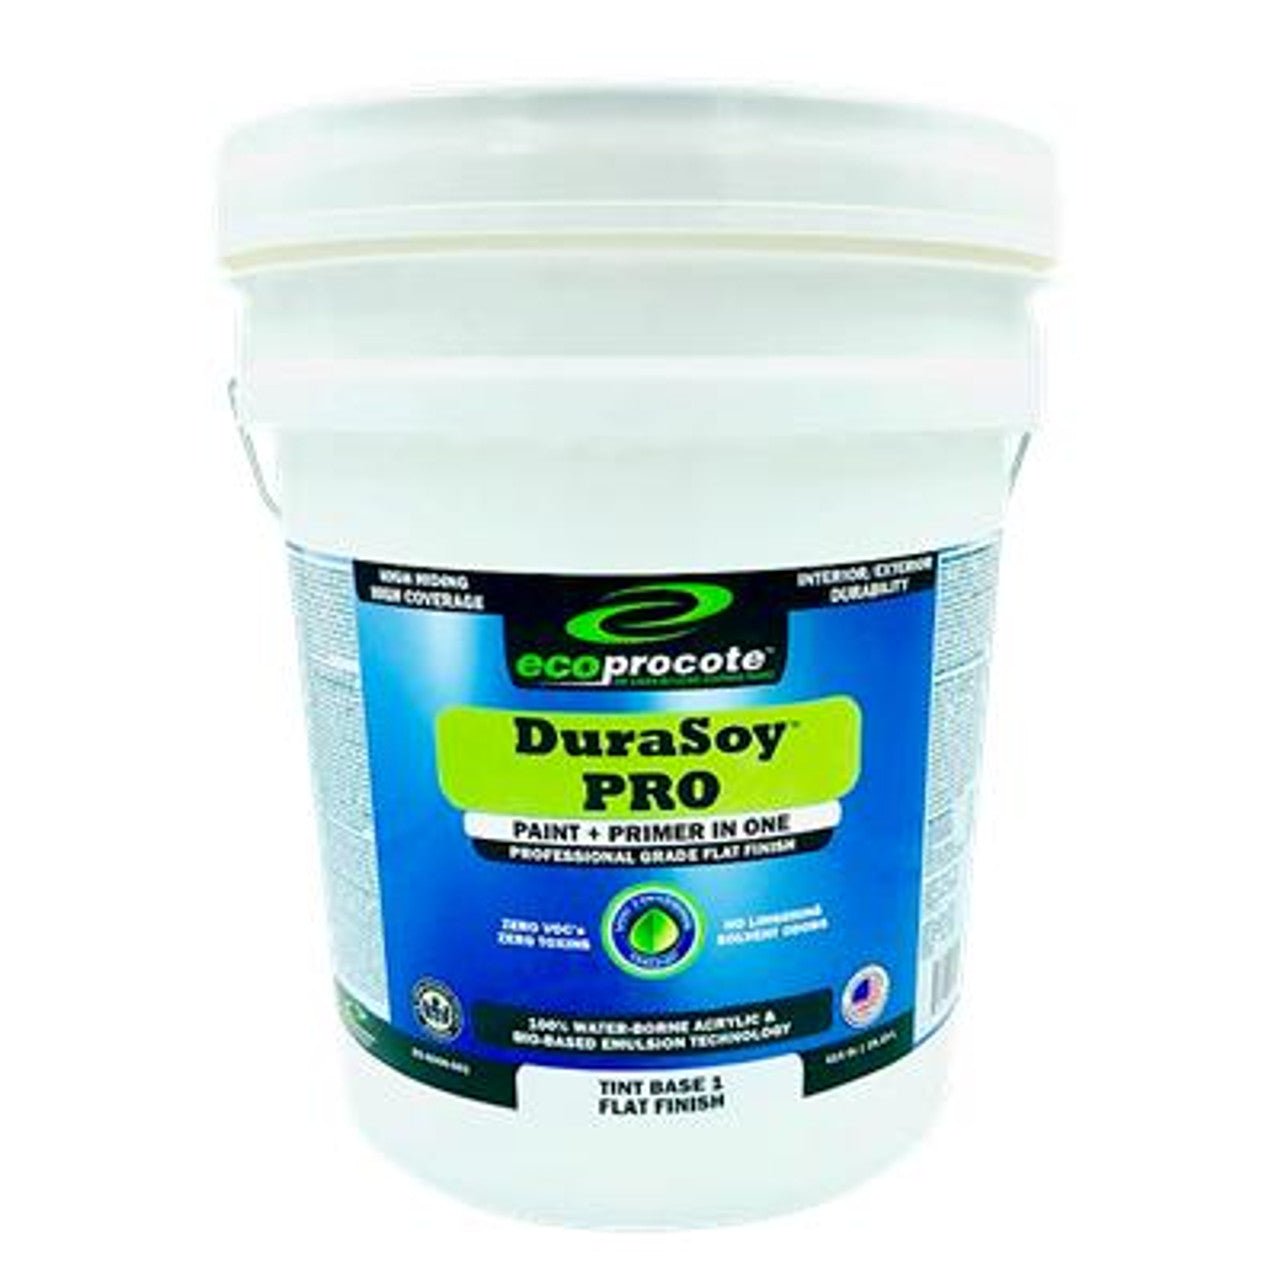 DuraSoy PRO Paint + Primer, Flat, Factory Tinted